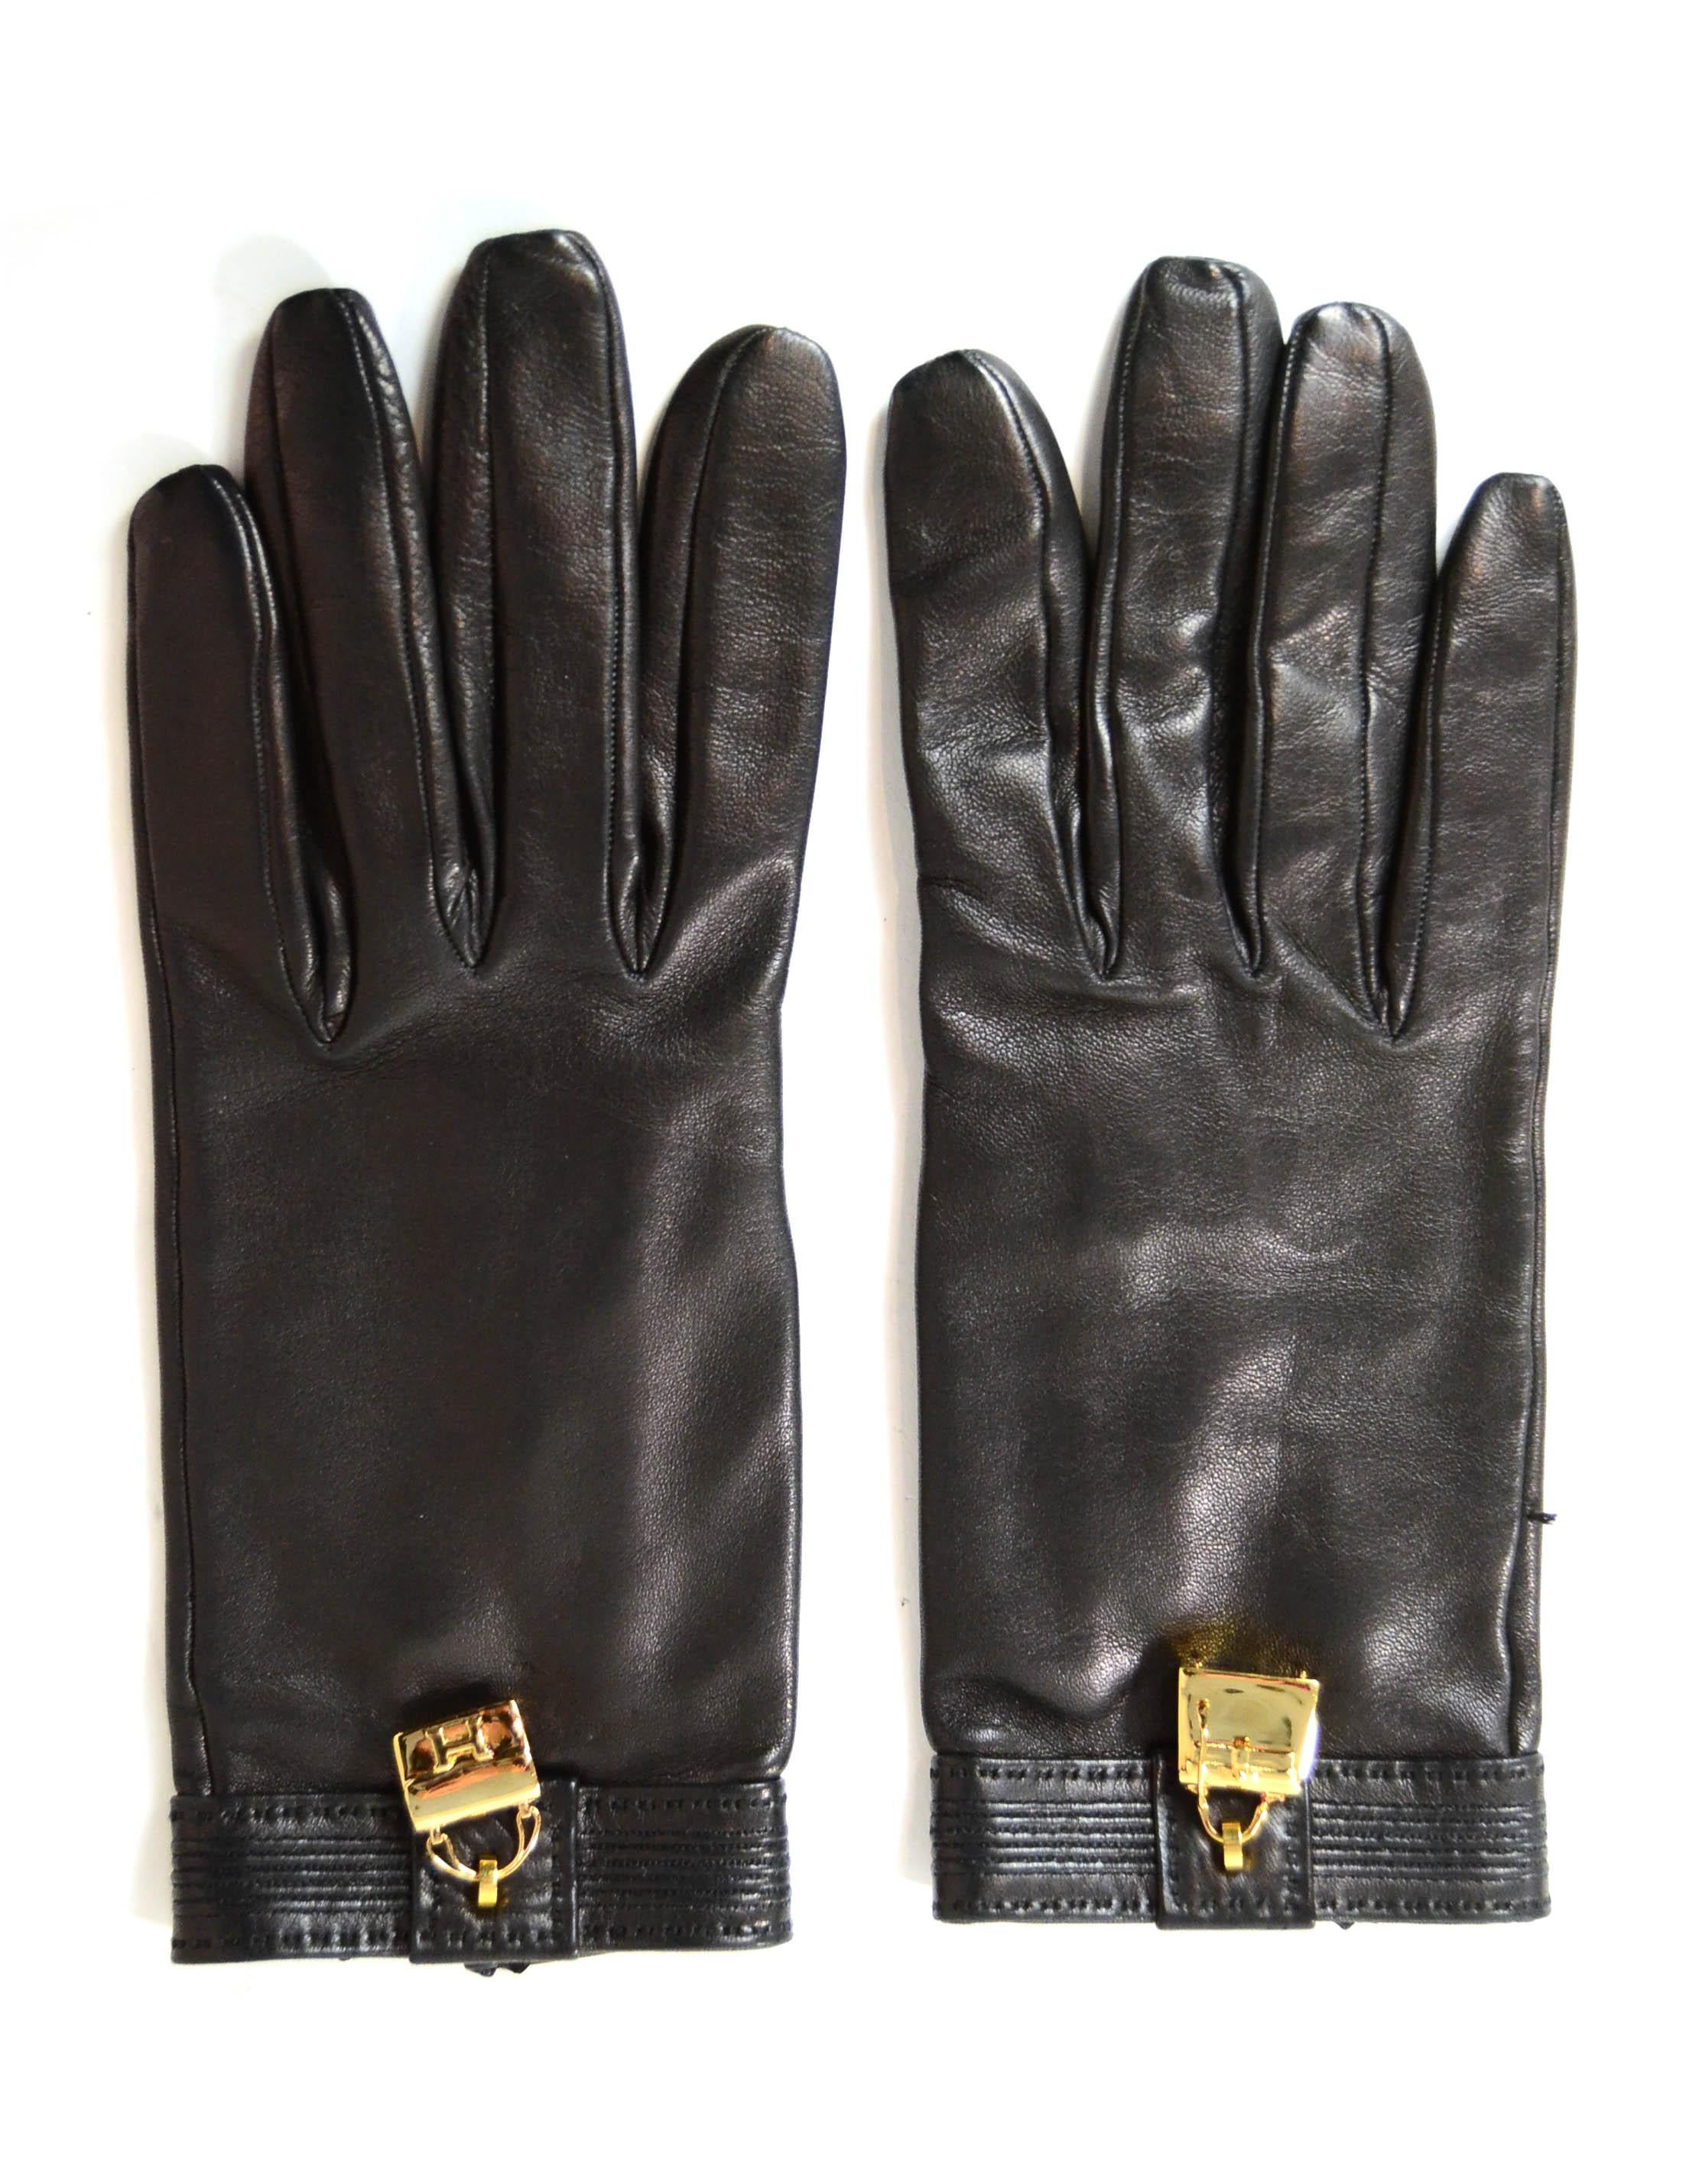 Hermes Black Leather Charm Gloves.  Features one glove with goldtone H constance bag charm and one with a Kelly bag charm.

Made In: France
Color: Black
Hardware: Goldtone
Materials: Leather
Overall Condition: Excellent - some piling to